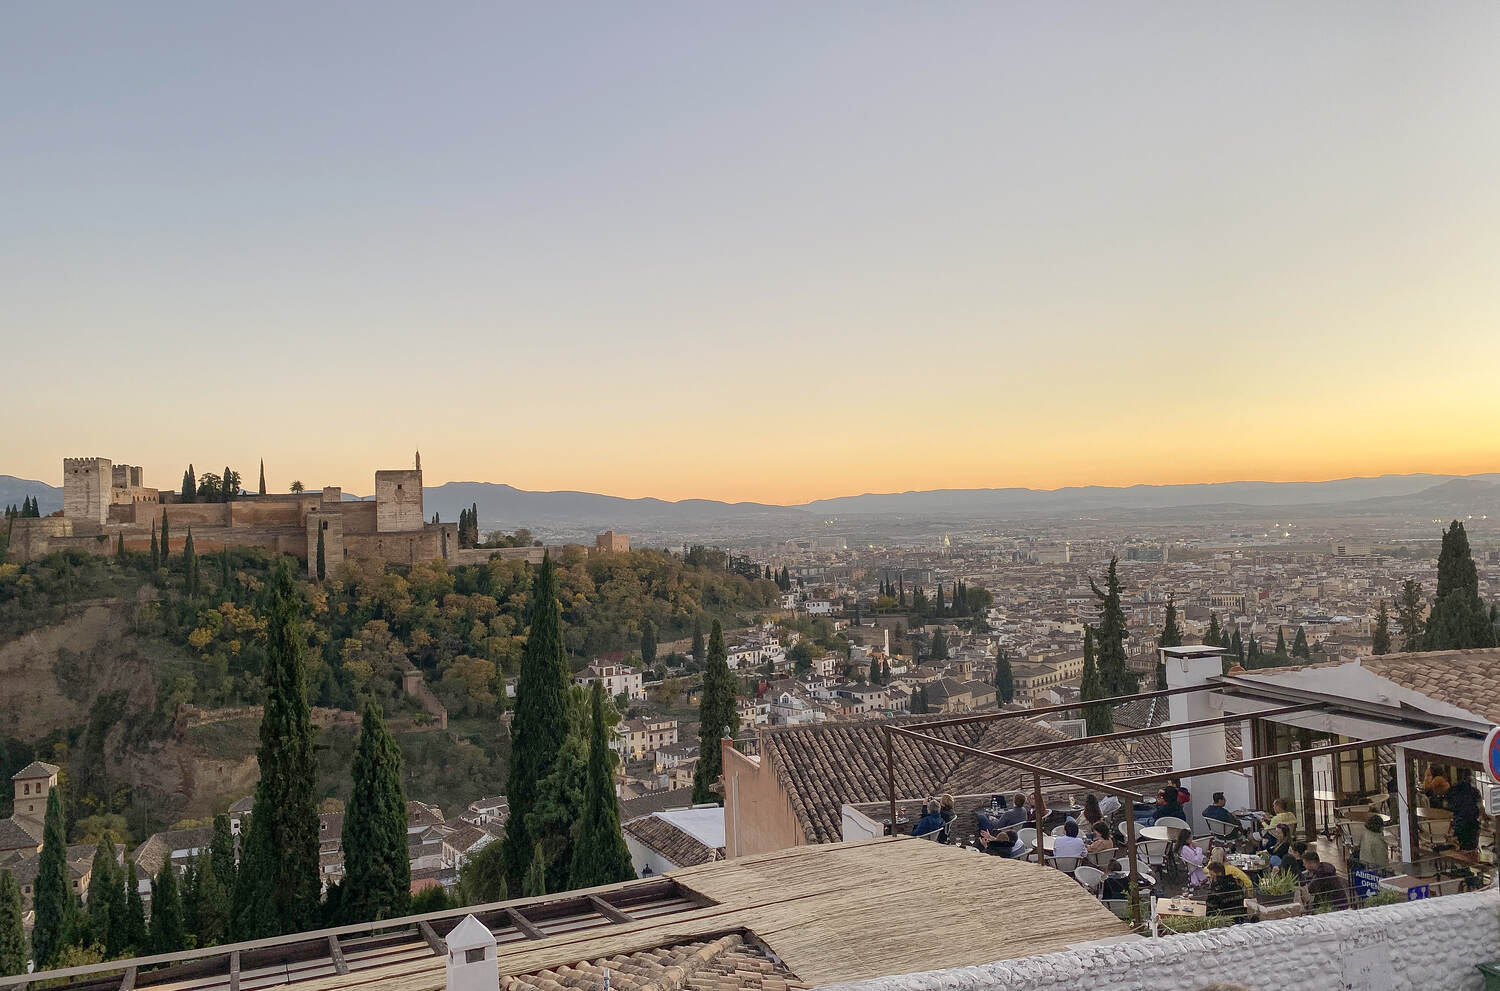 Views of the Alhambra from San Nicolas mirador right during sunset